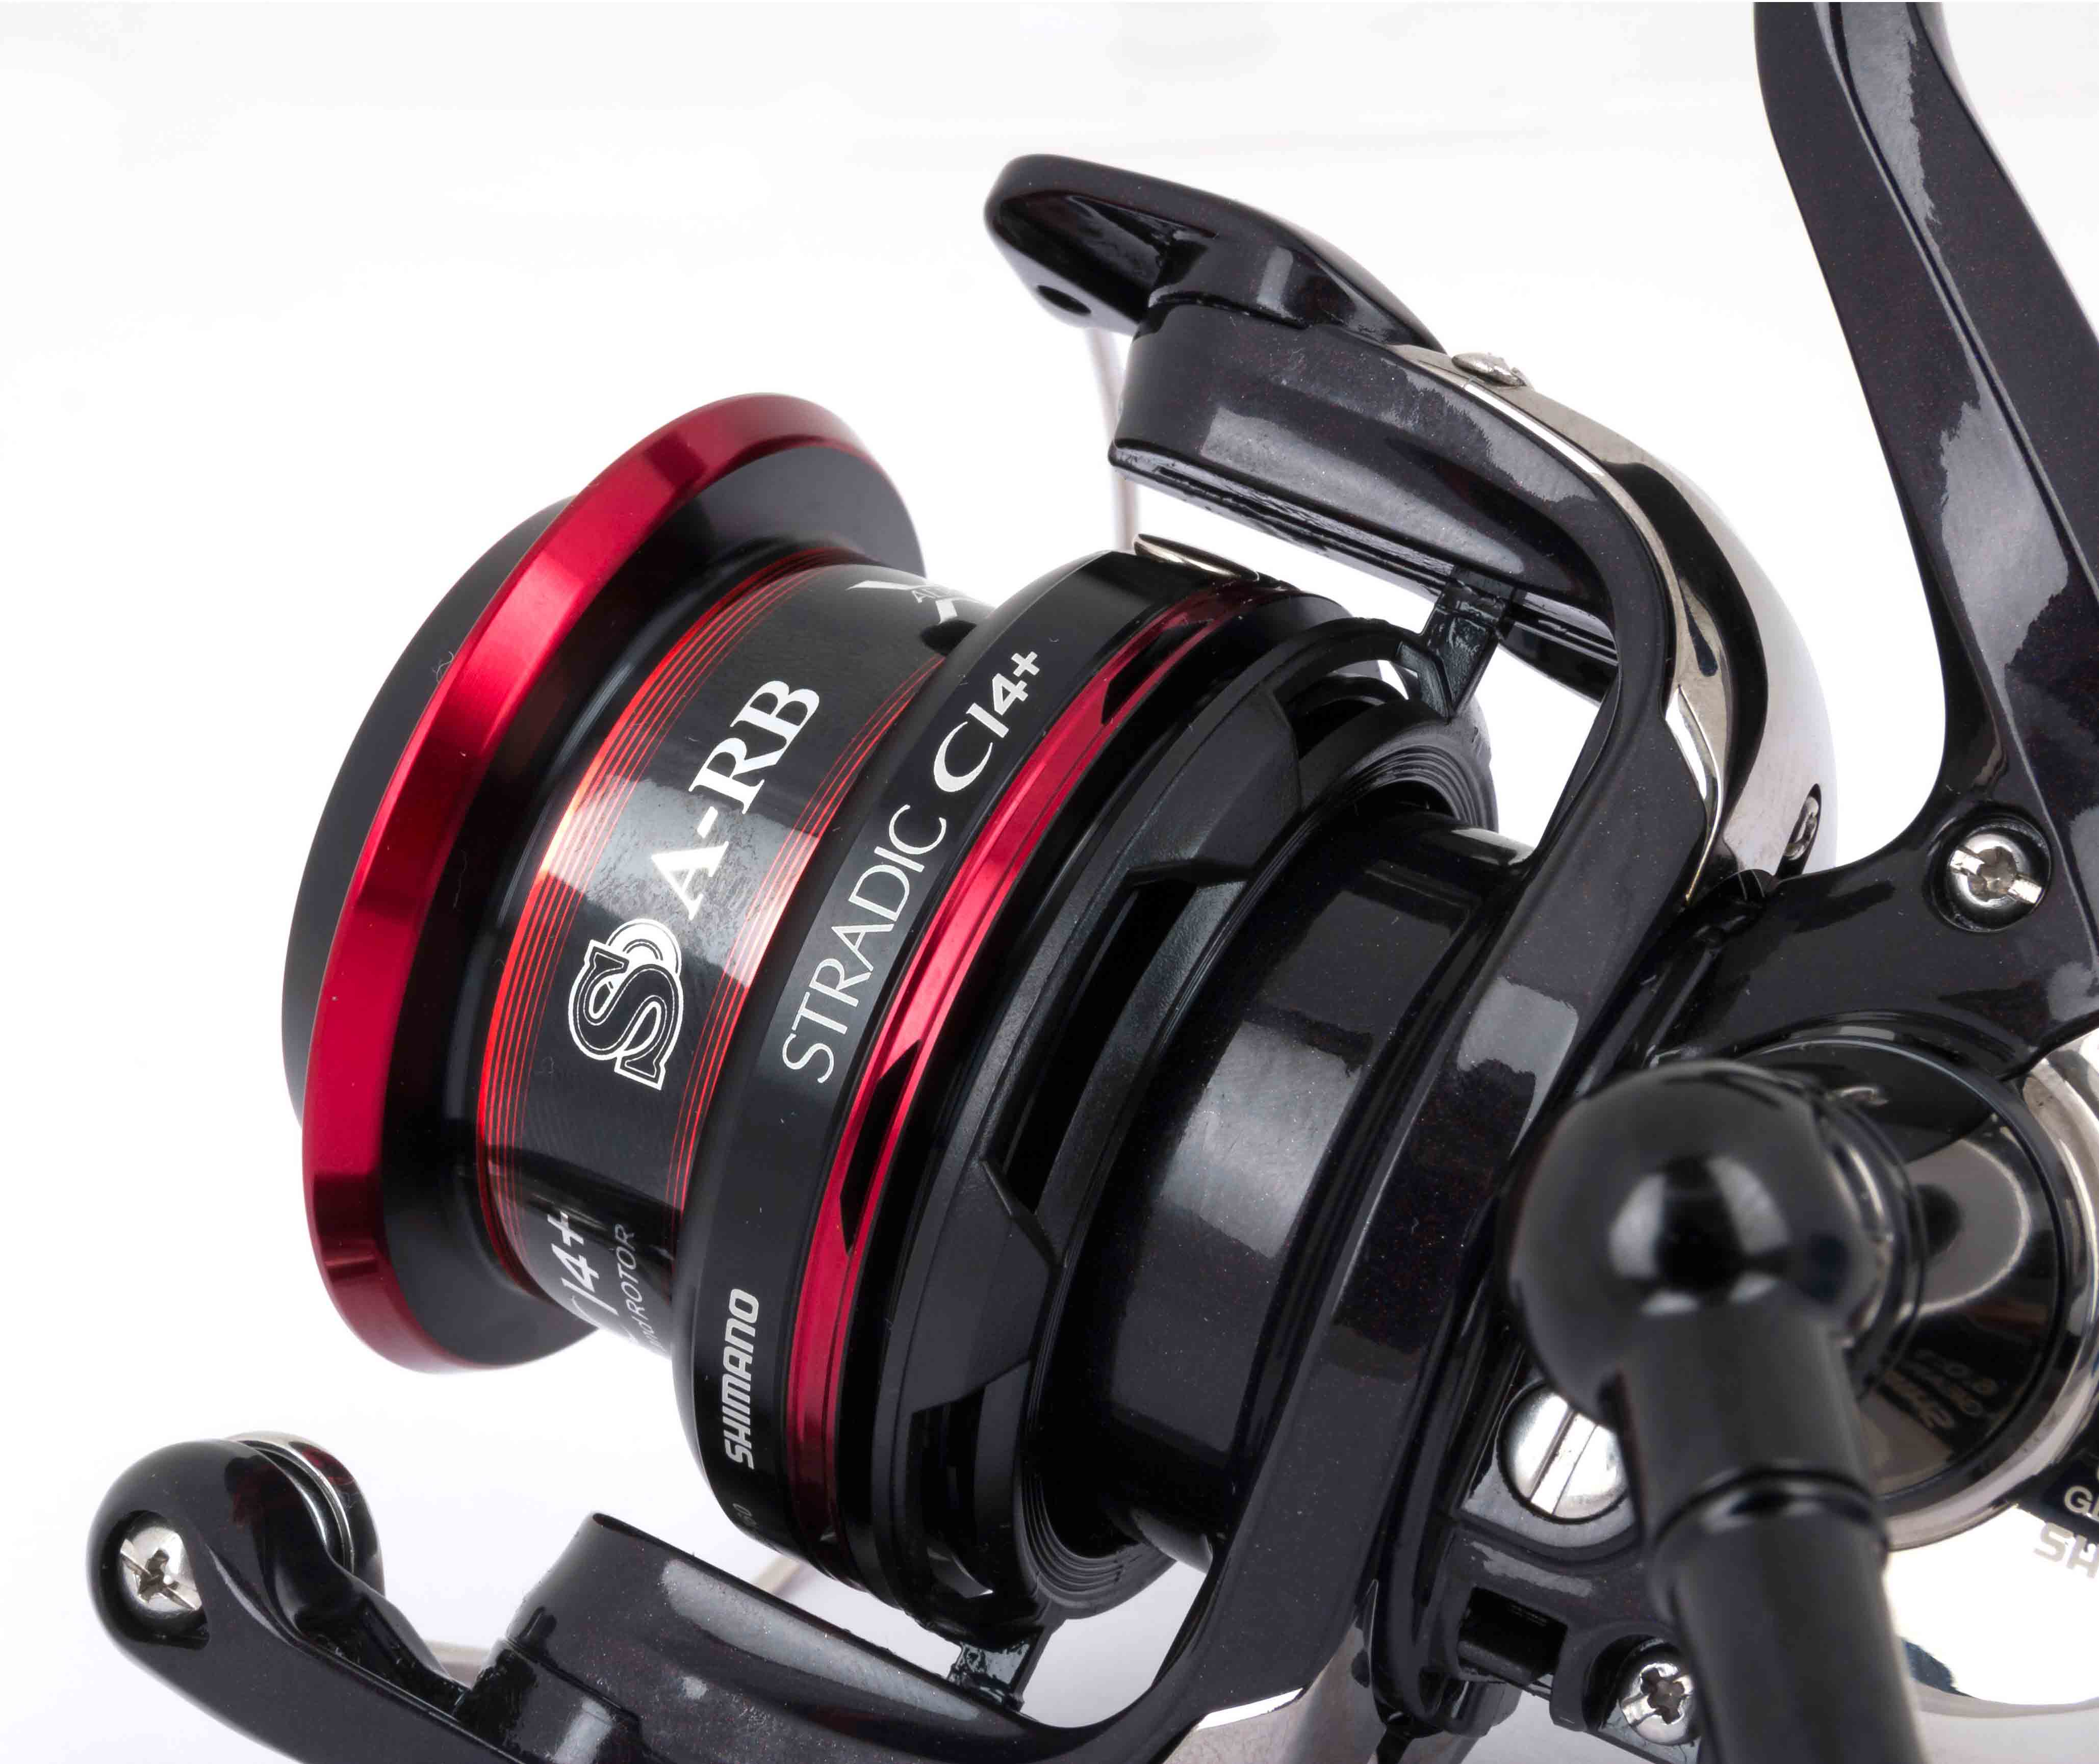 Shimano Stradic Ci4 2500 - Hard To Trip And Noisy When Wet